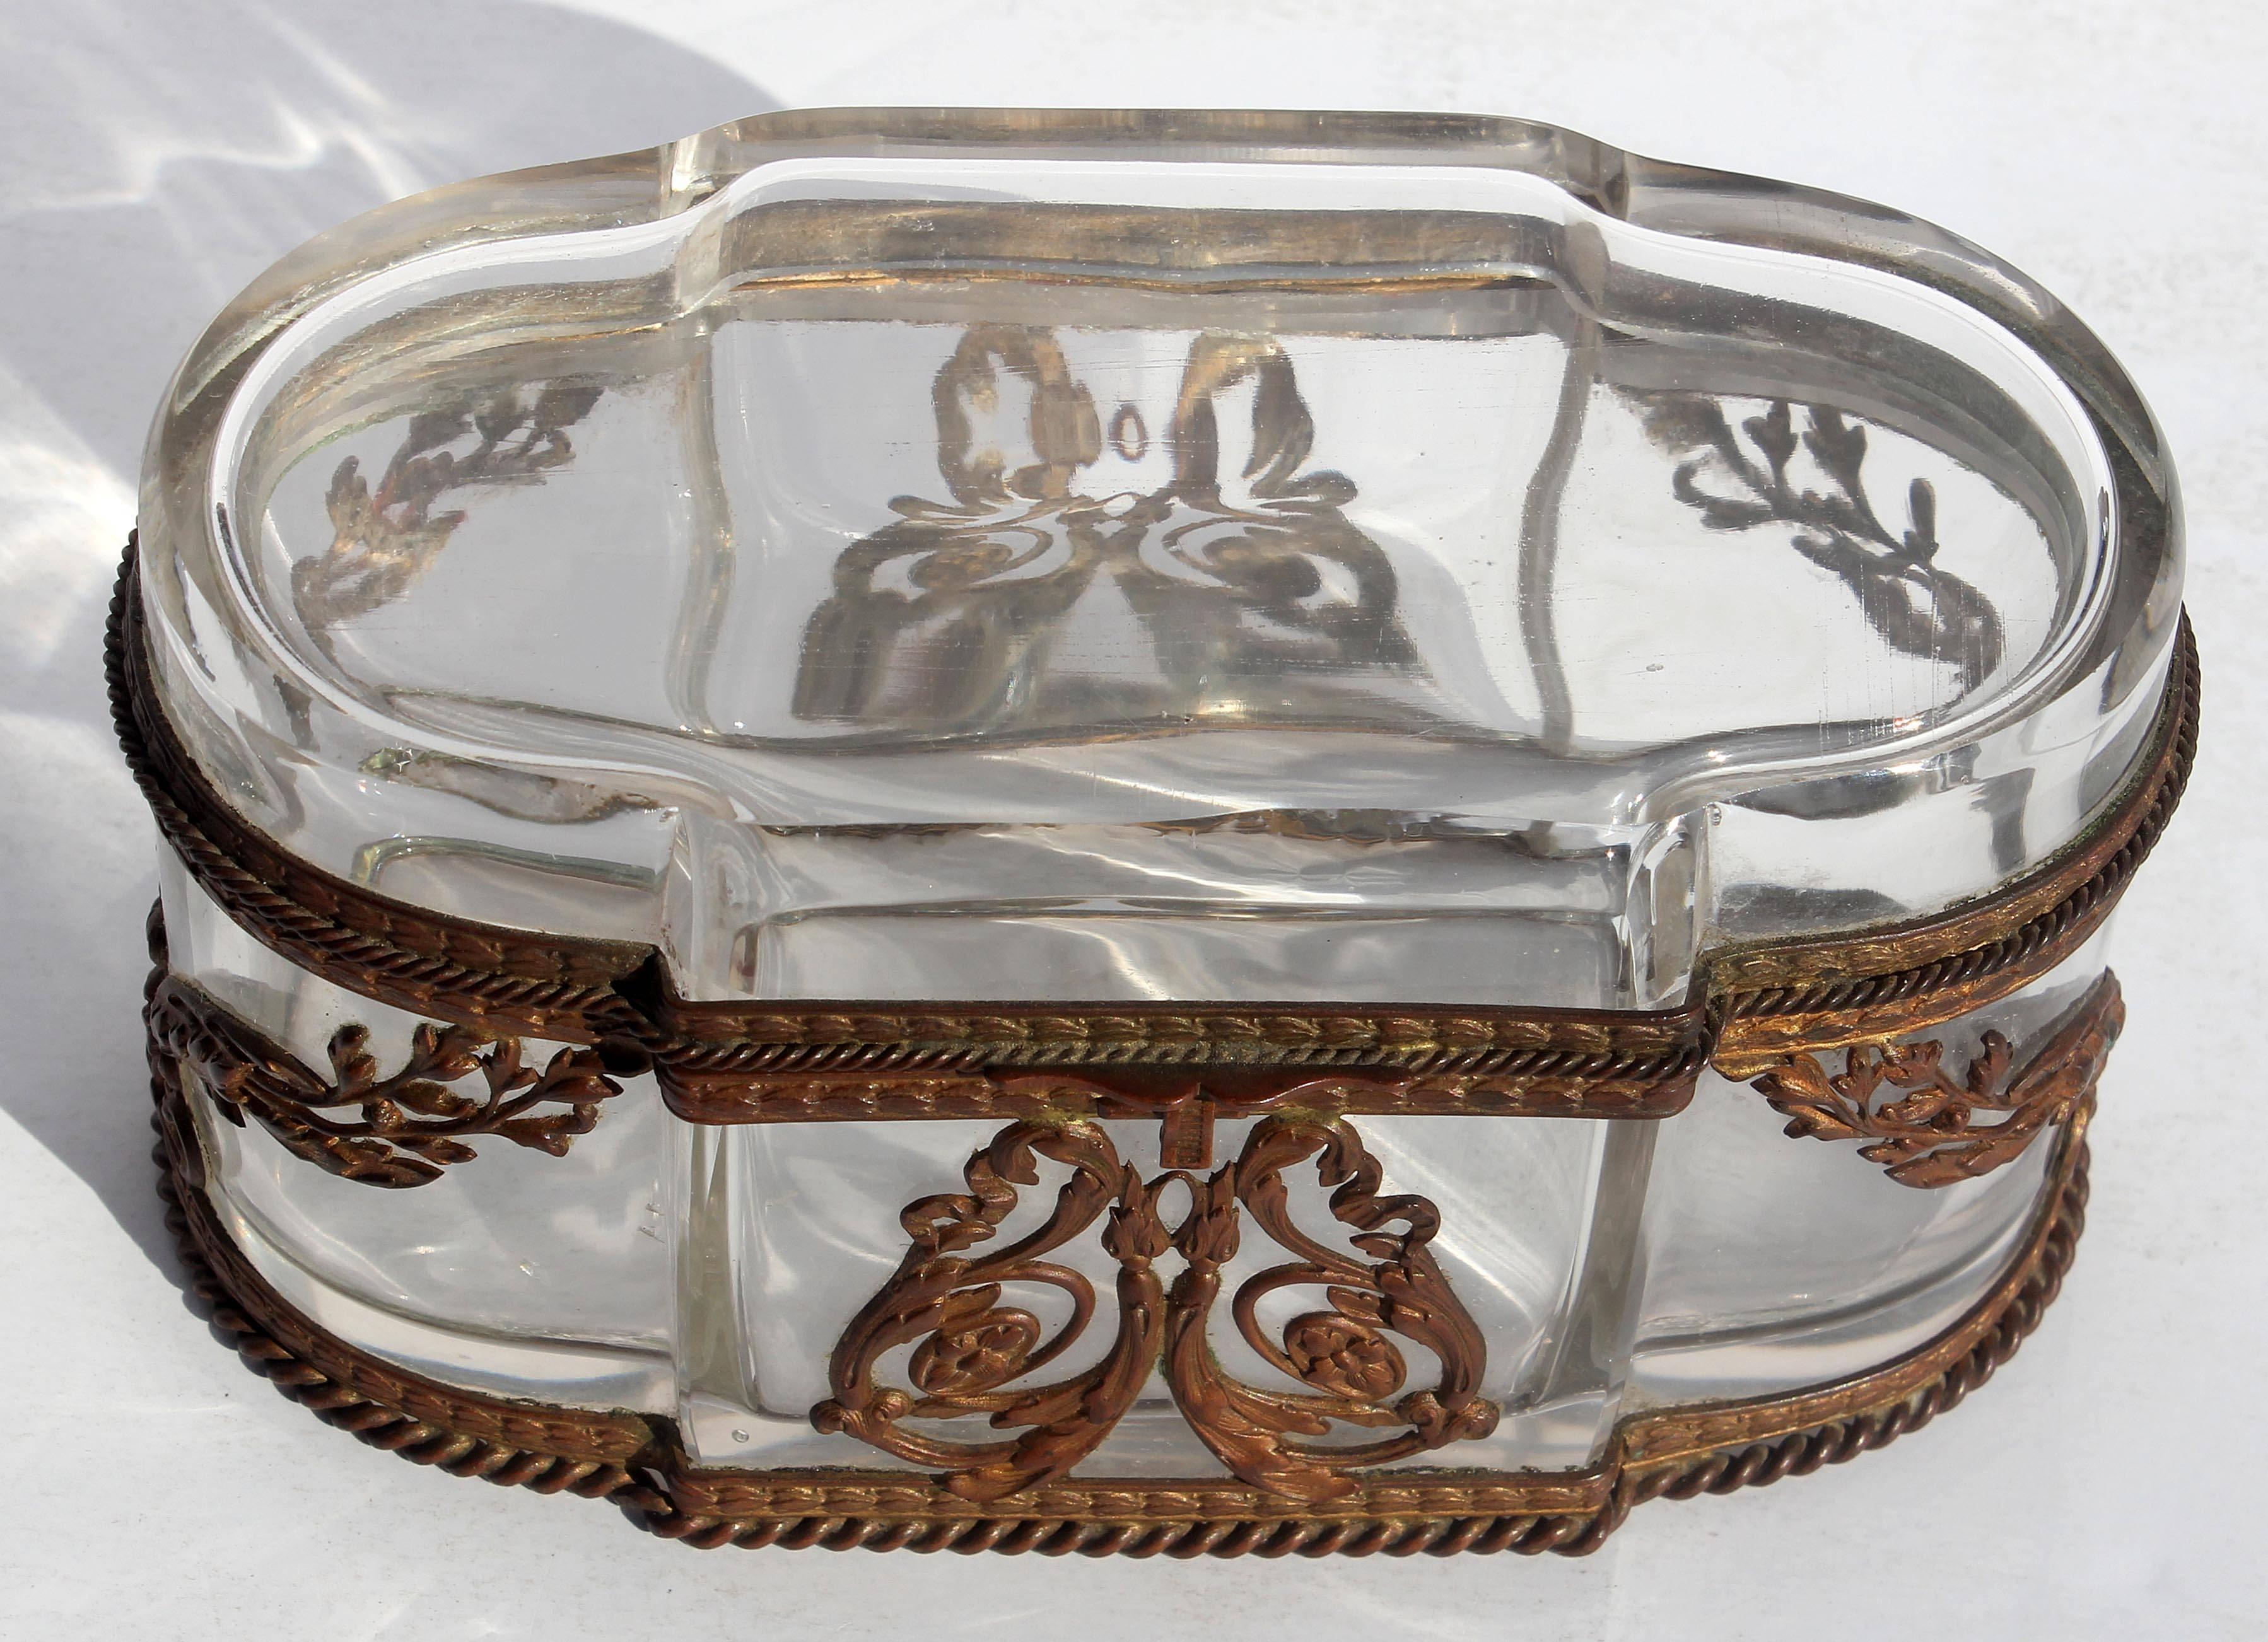 Bronze-mounted crystal trinket box. French, late 19th century.